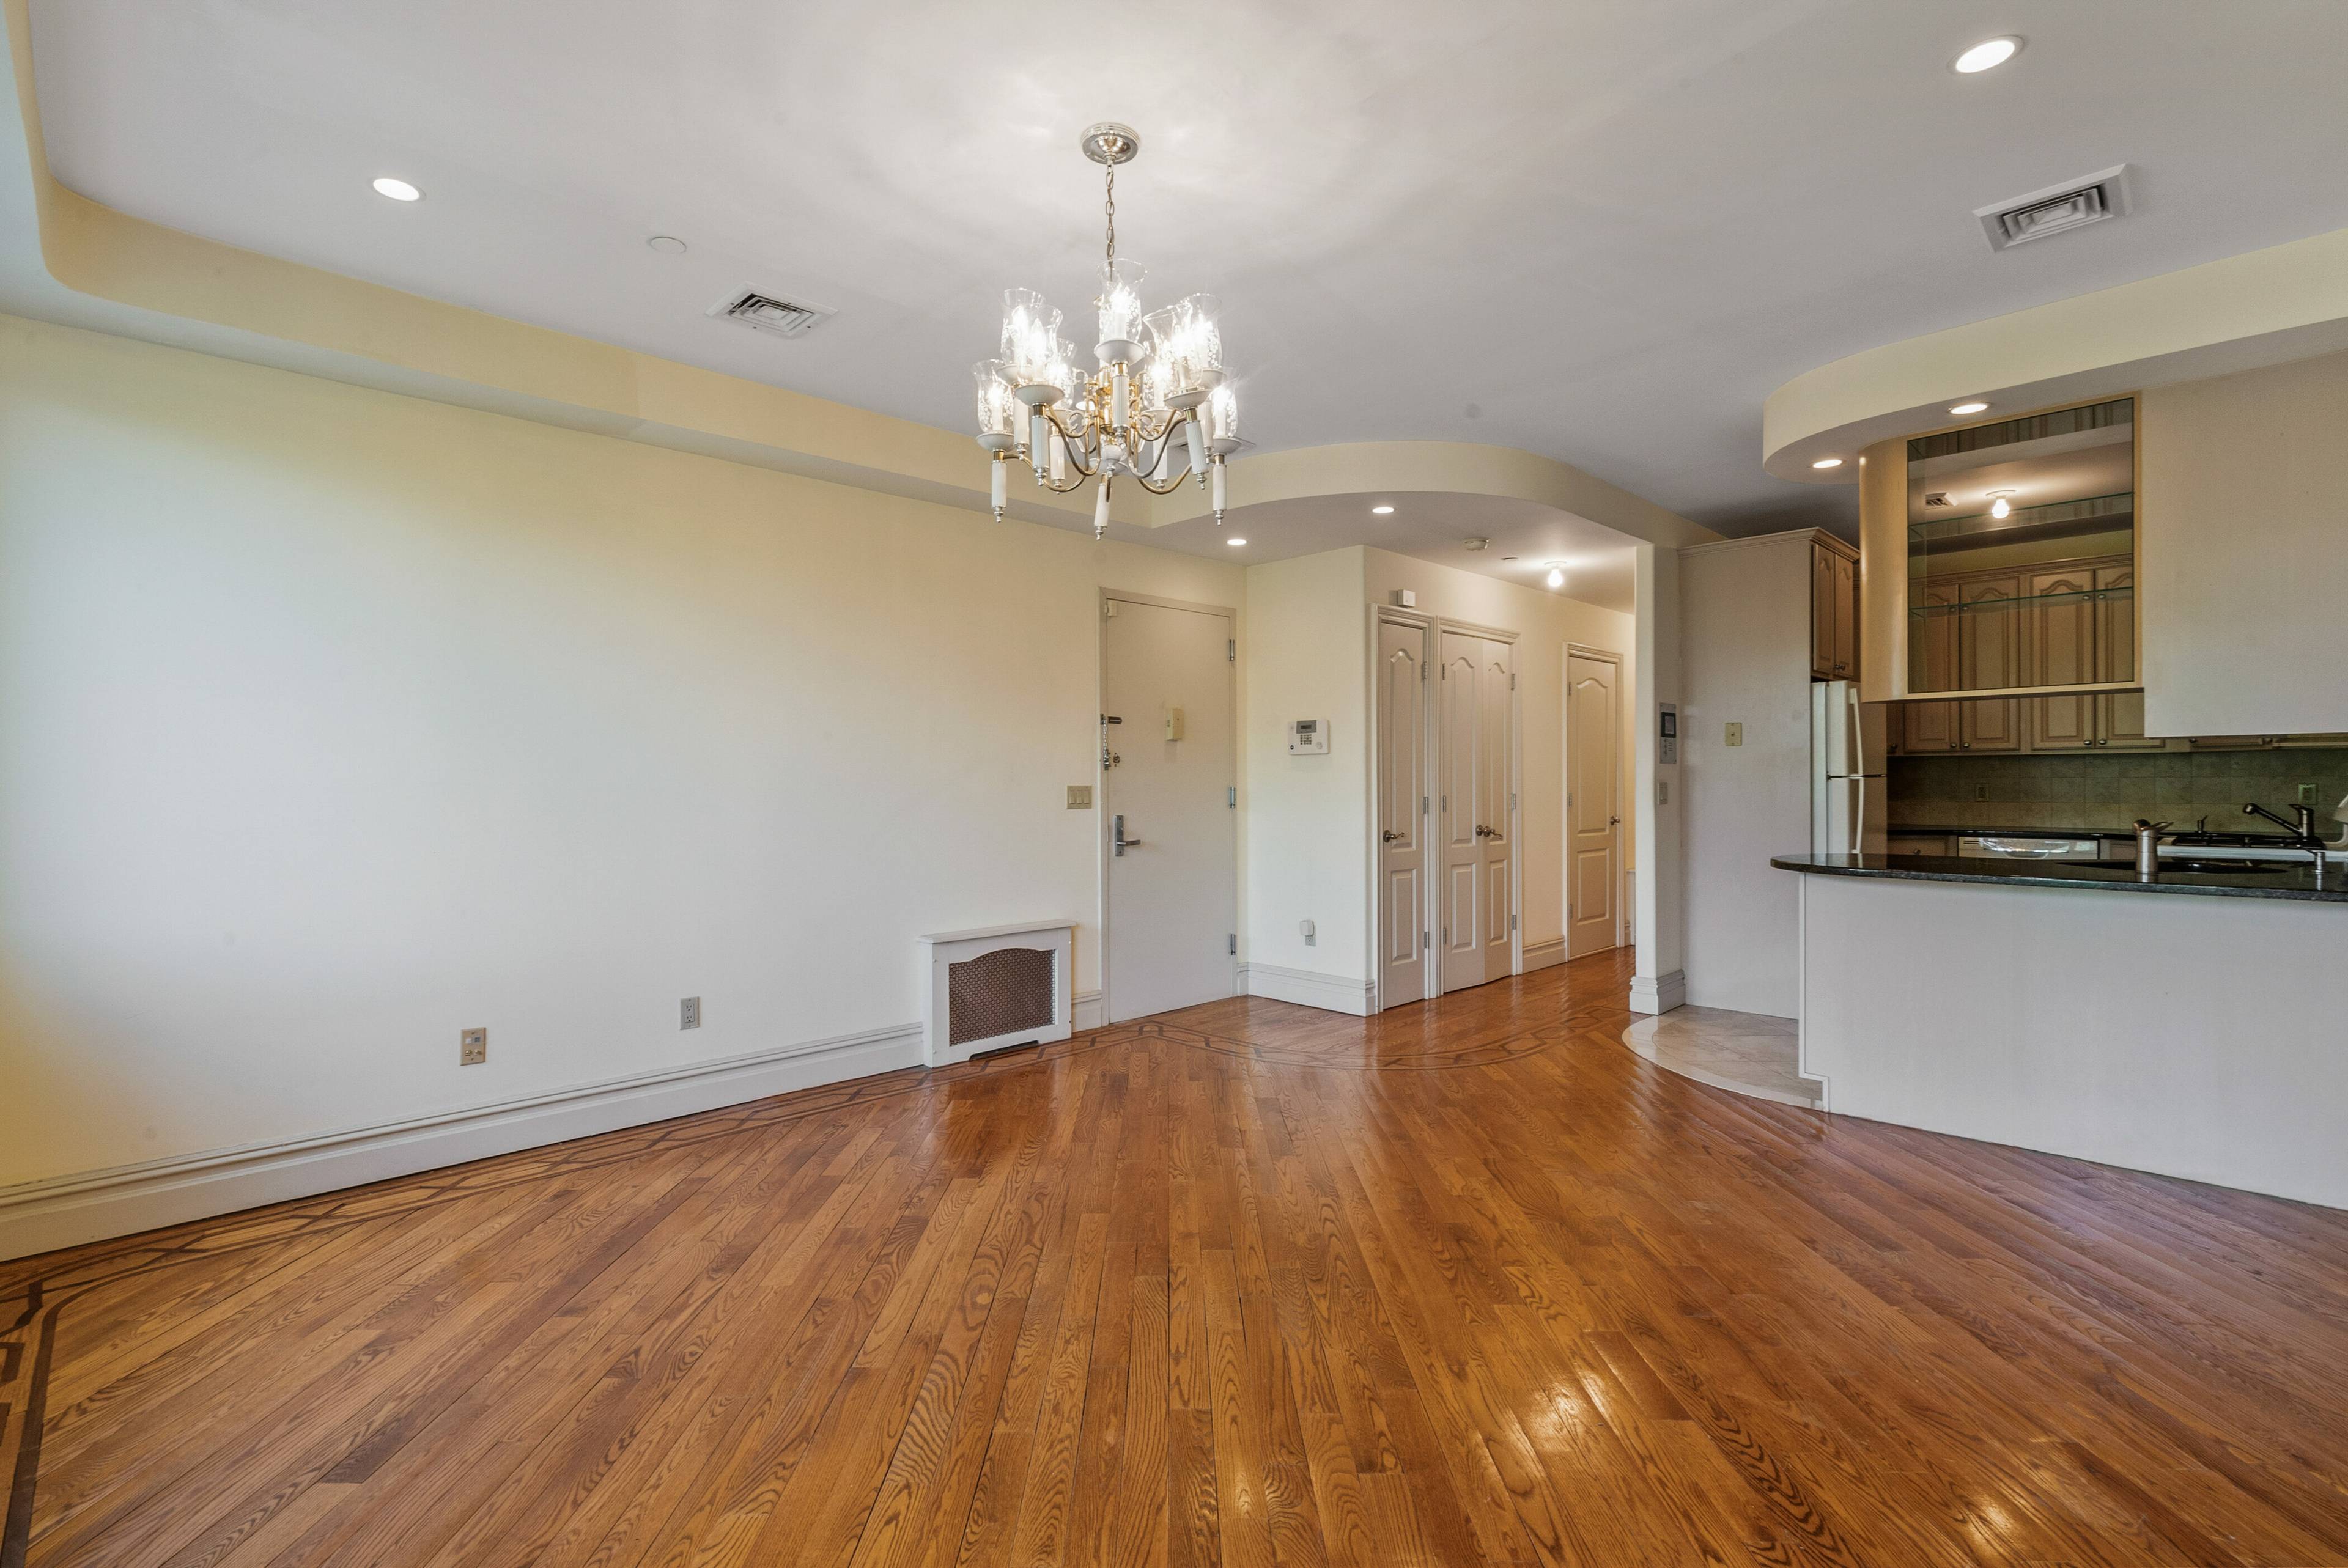 Welcome to this custom two bed two bath unit located in the Madison proper section of Brooklyn.